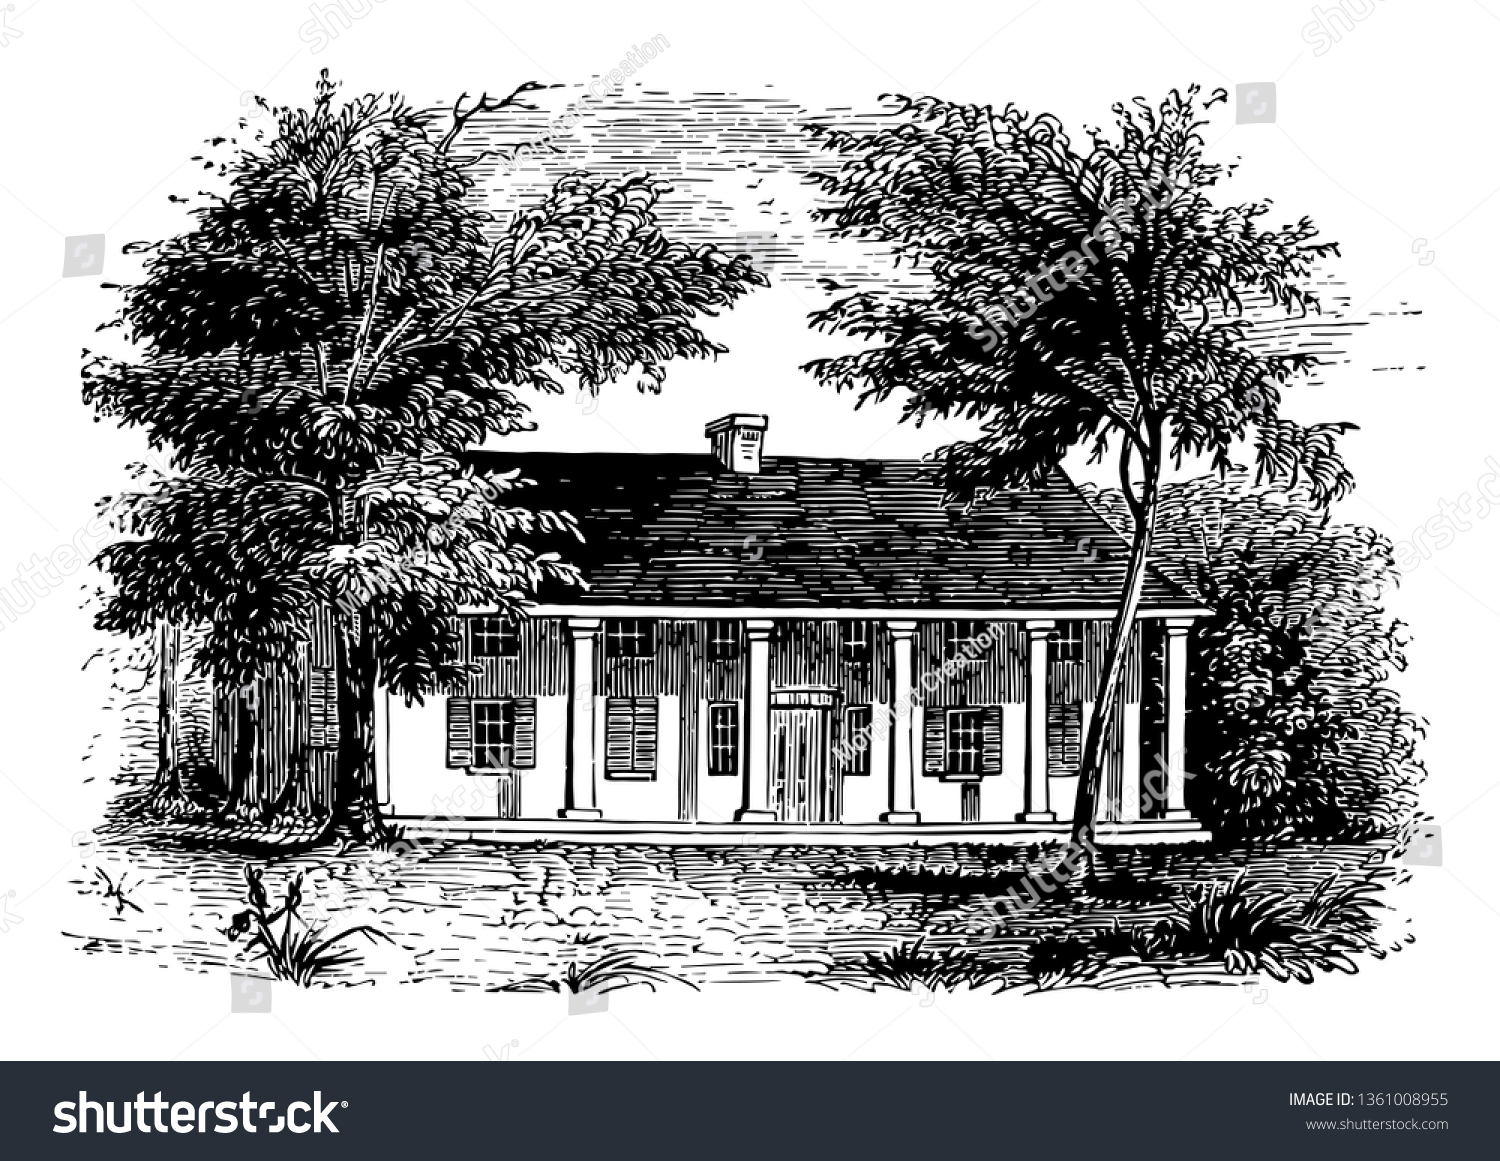 SVG of General Schuylers house built in 1777 , occupied by the British army during American Revolutionary war  vintage line drawing. svg